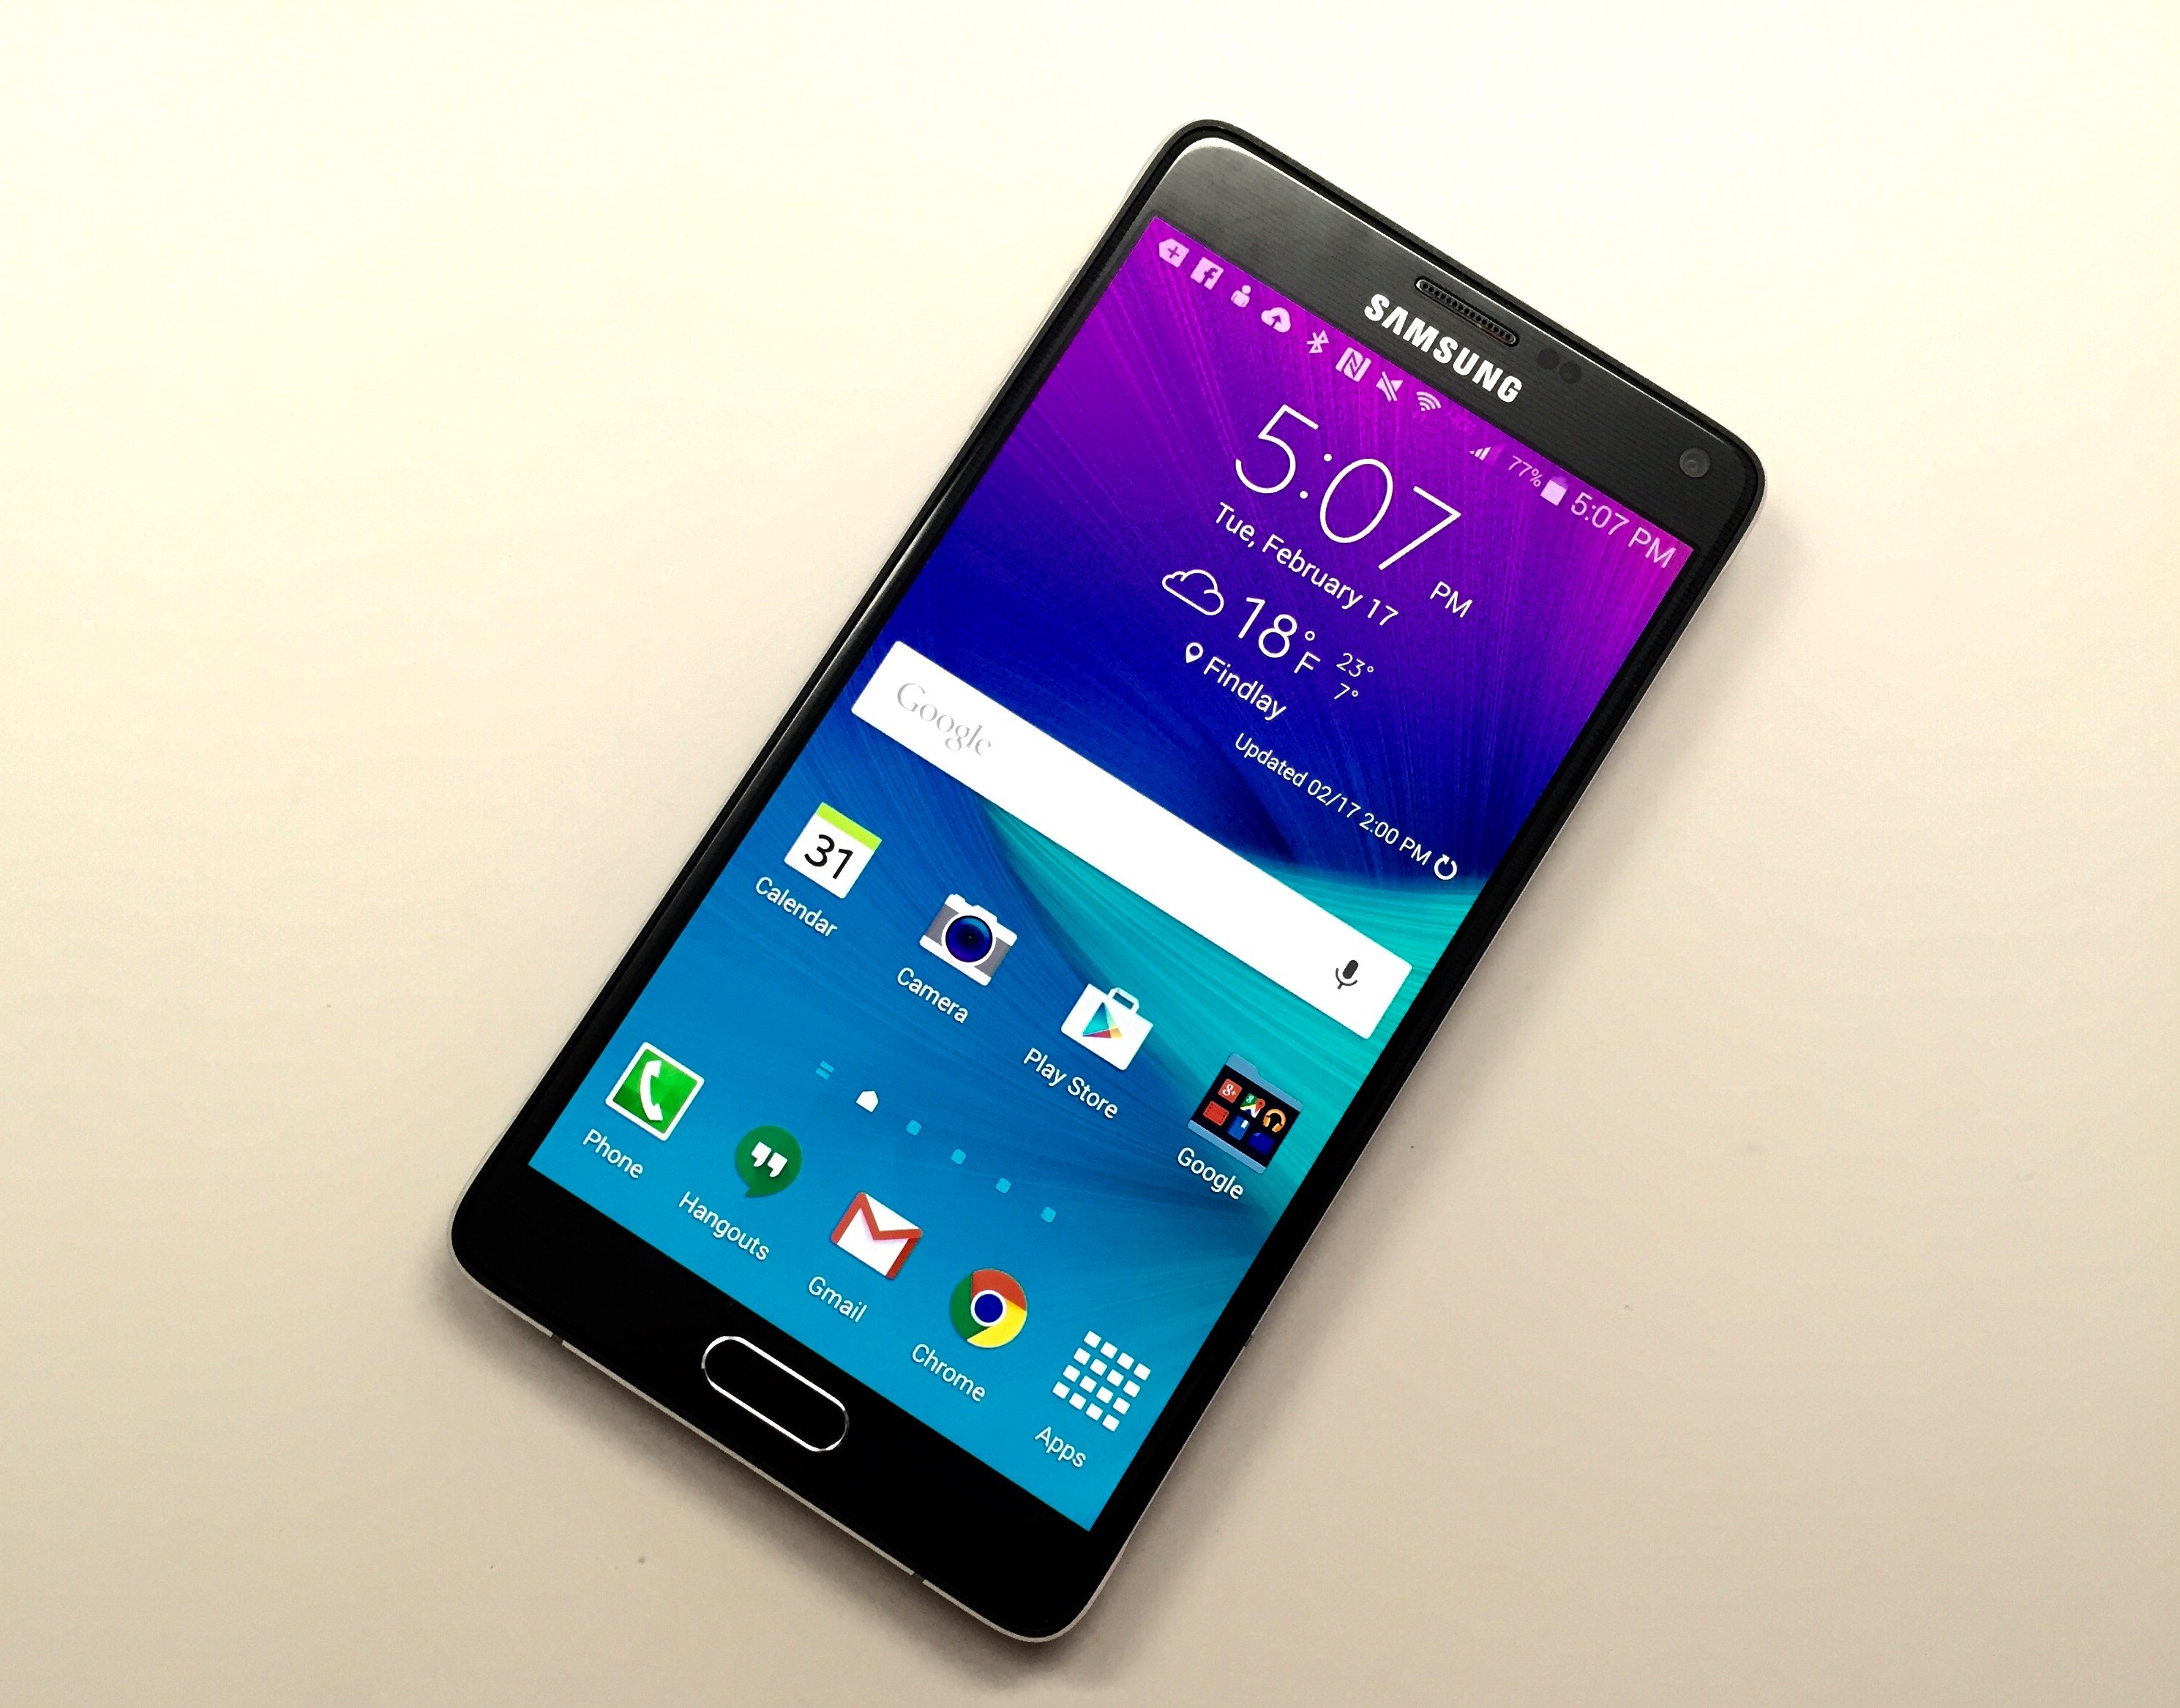 The Galaxy Note 4 display is stunning, but not as bright as the Galaxy S6 display.